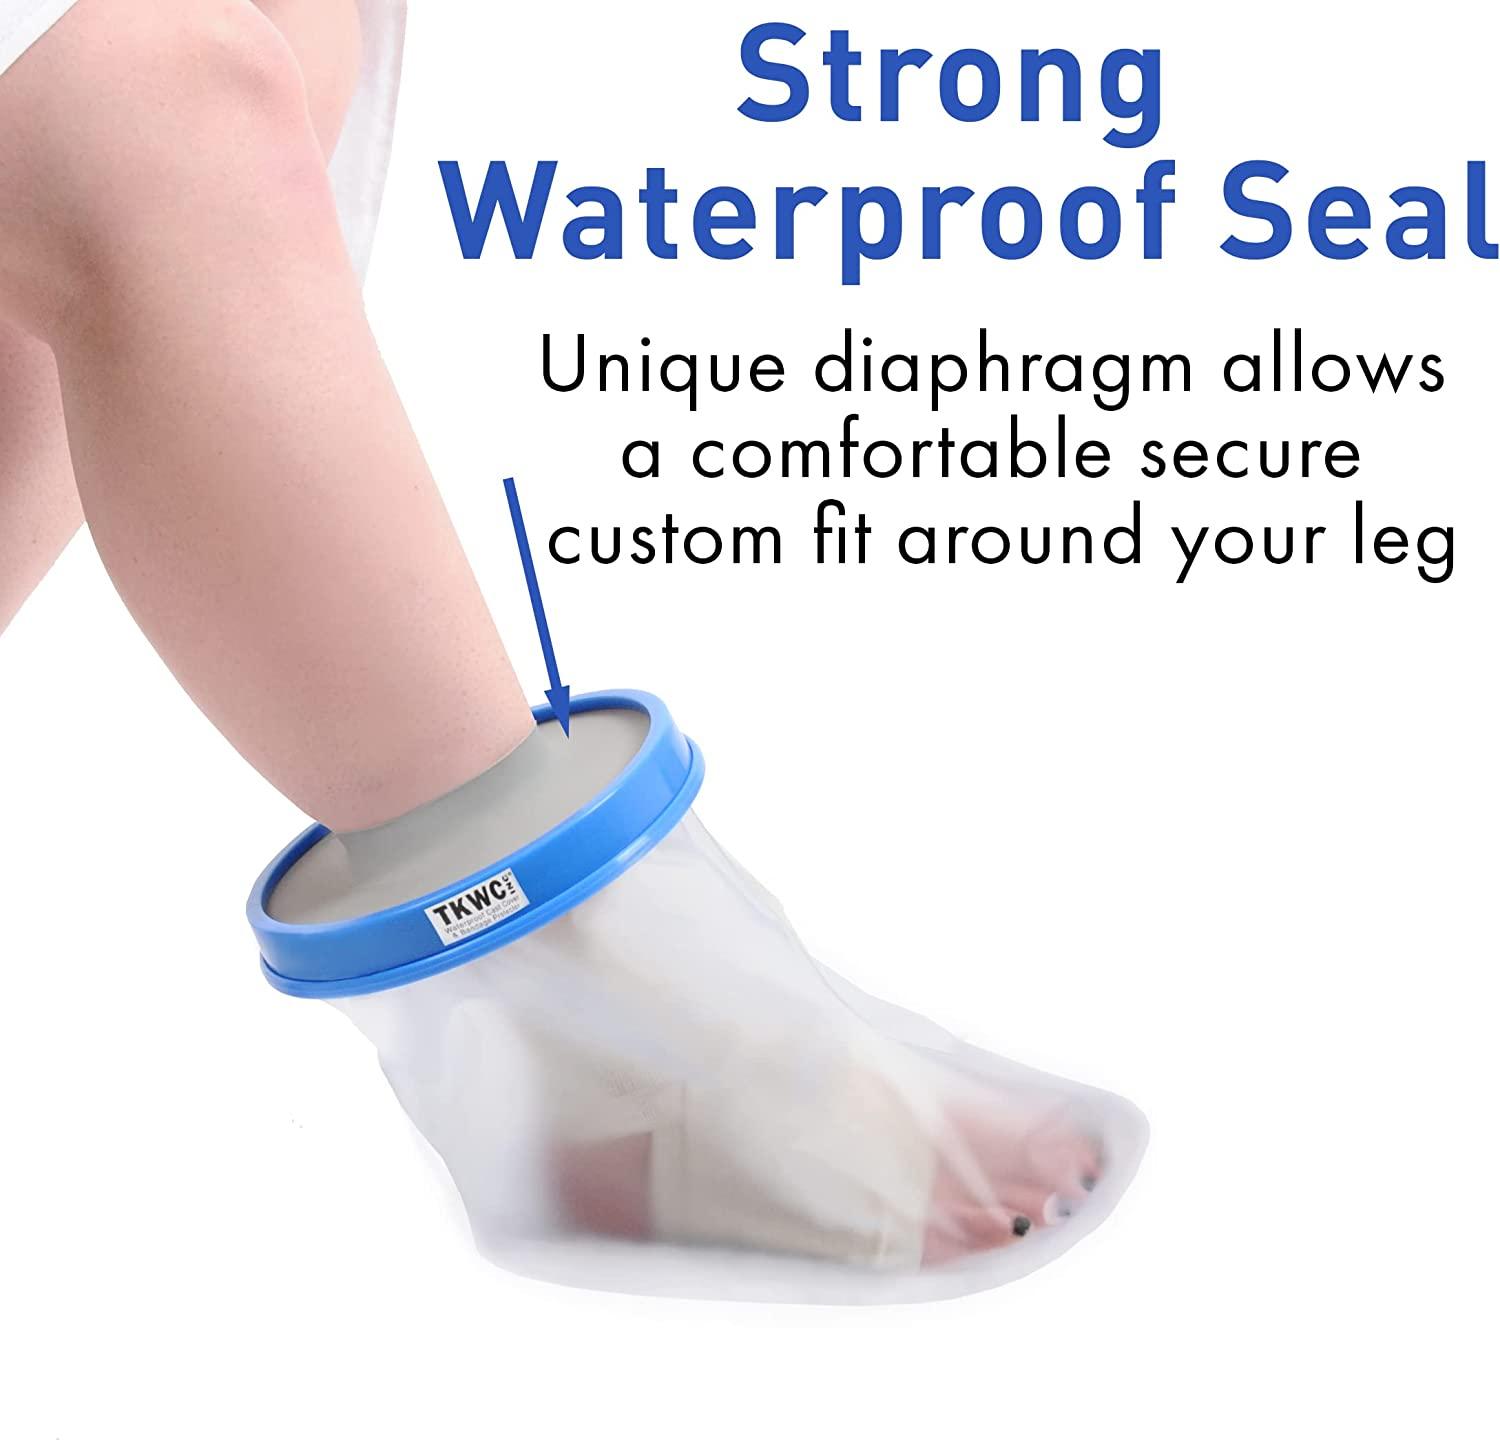 TKWC INC Foot & Ankle - Waterproof Foot Cast Cover for Shower 5737 -  Watertight Foot Protector